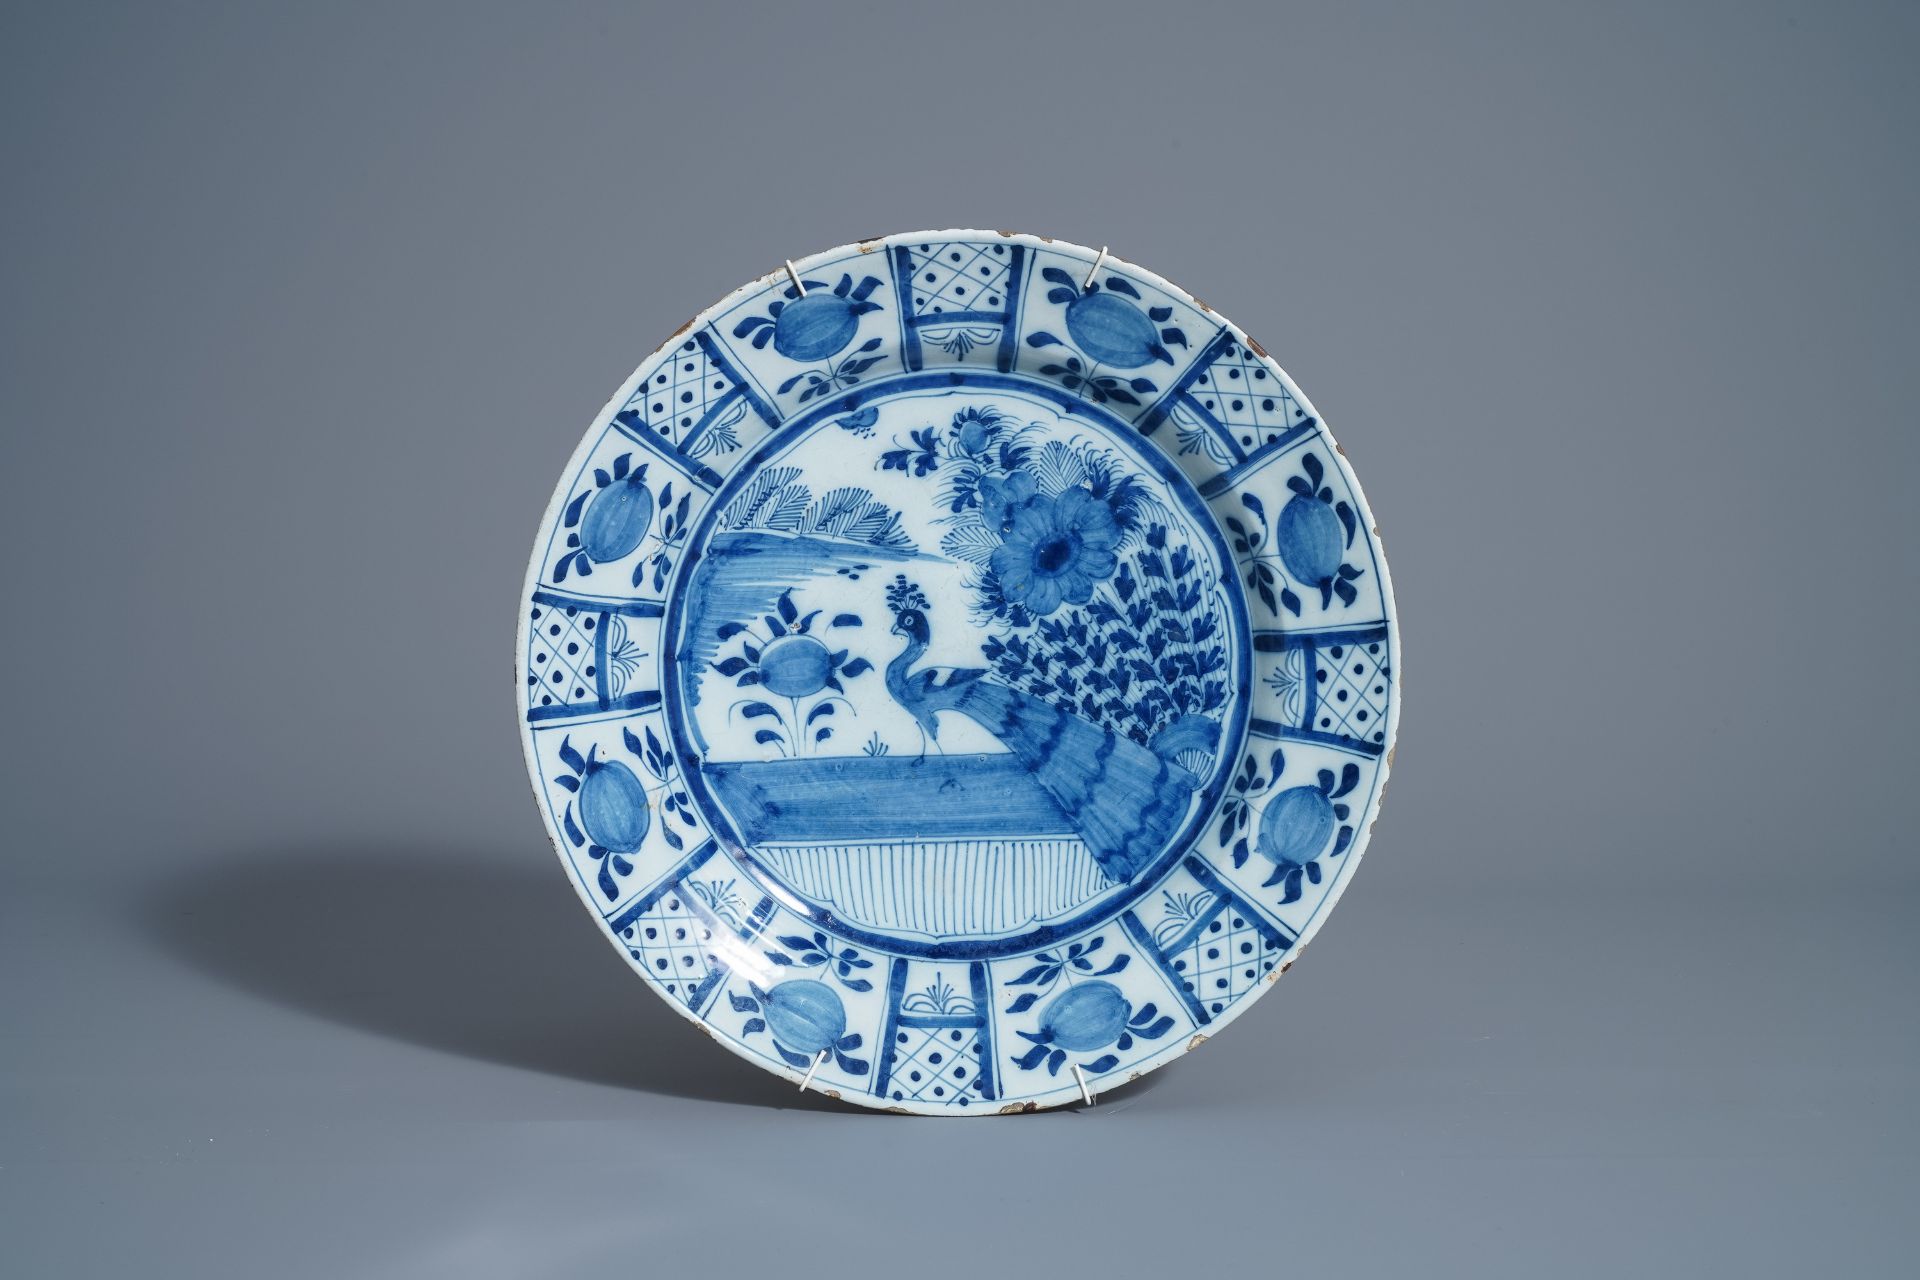 Twelve polychrome and blue and white Dutch Delft plates and an oval tray, 18th C. - Image 6 of 13